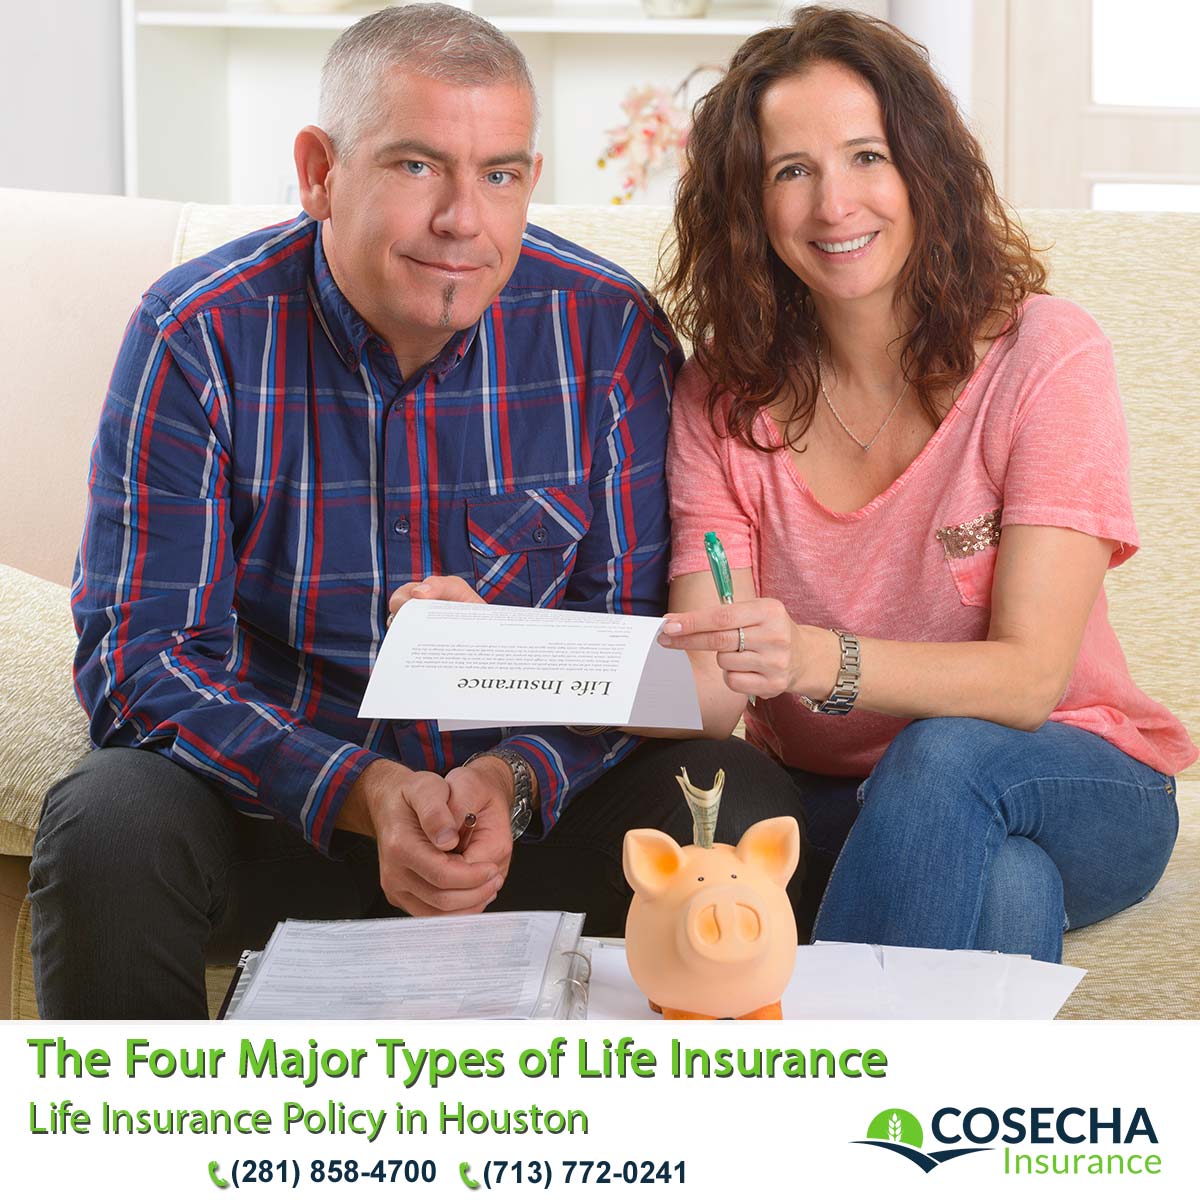 21 The Four Major Types of Life Insurance